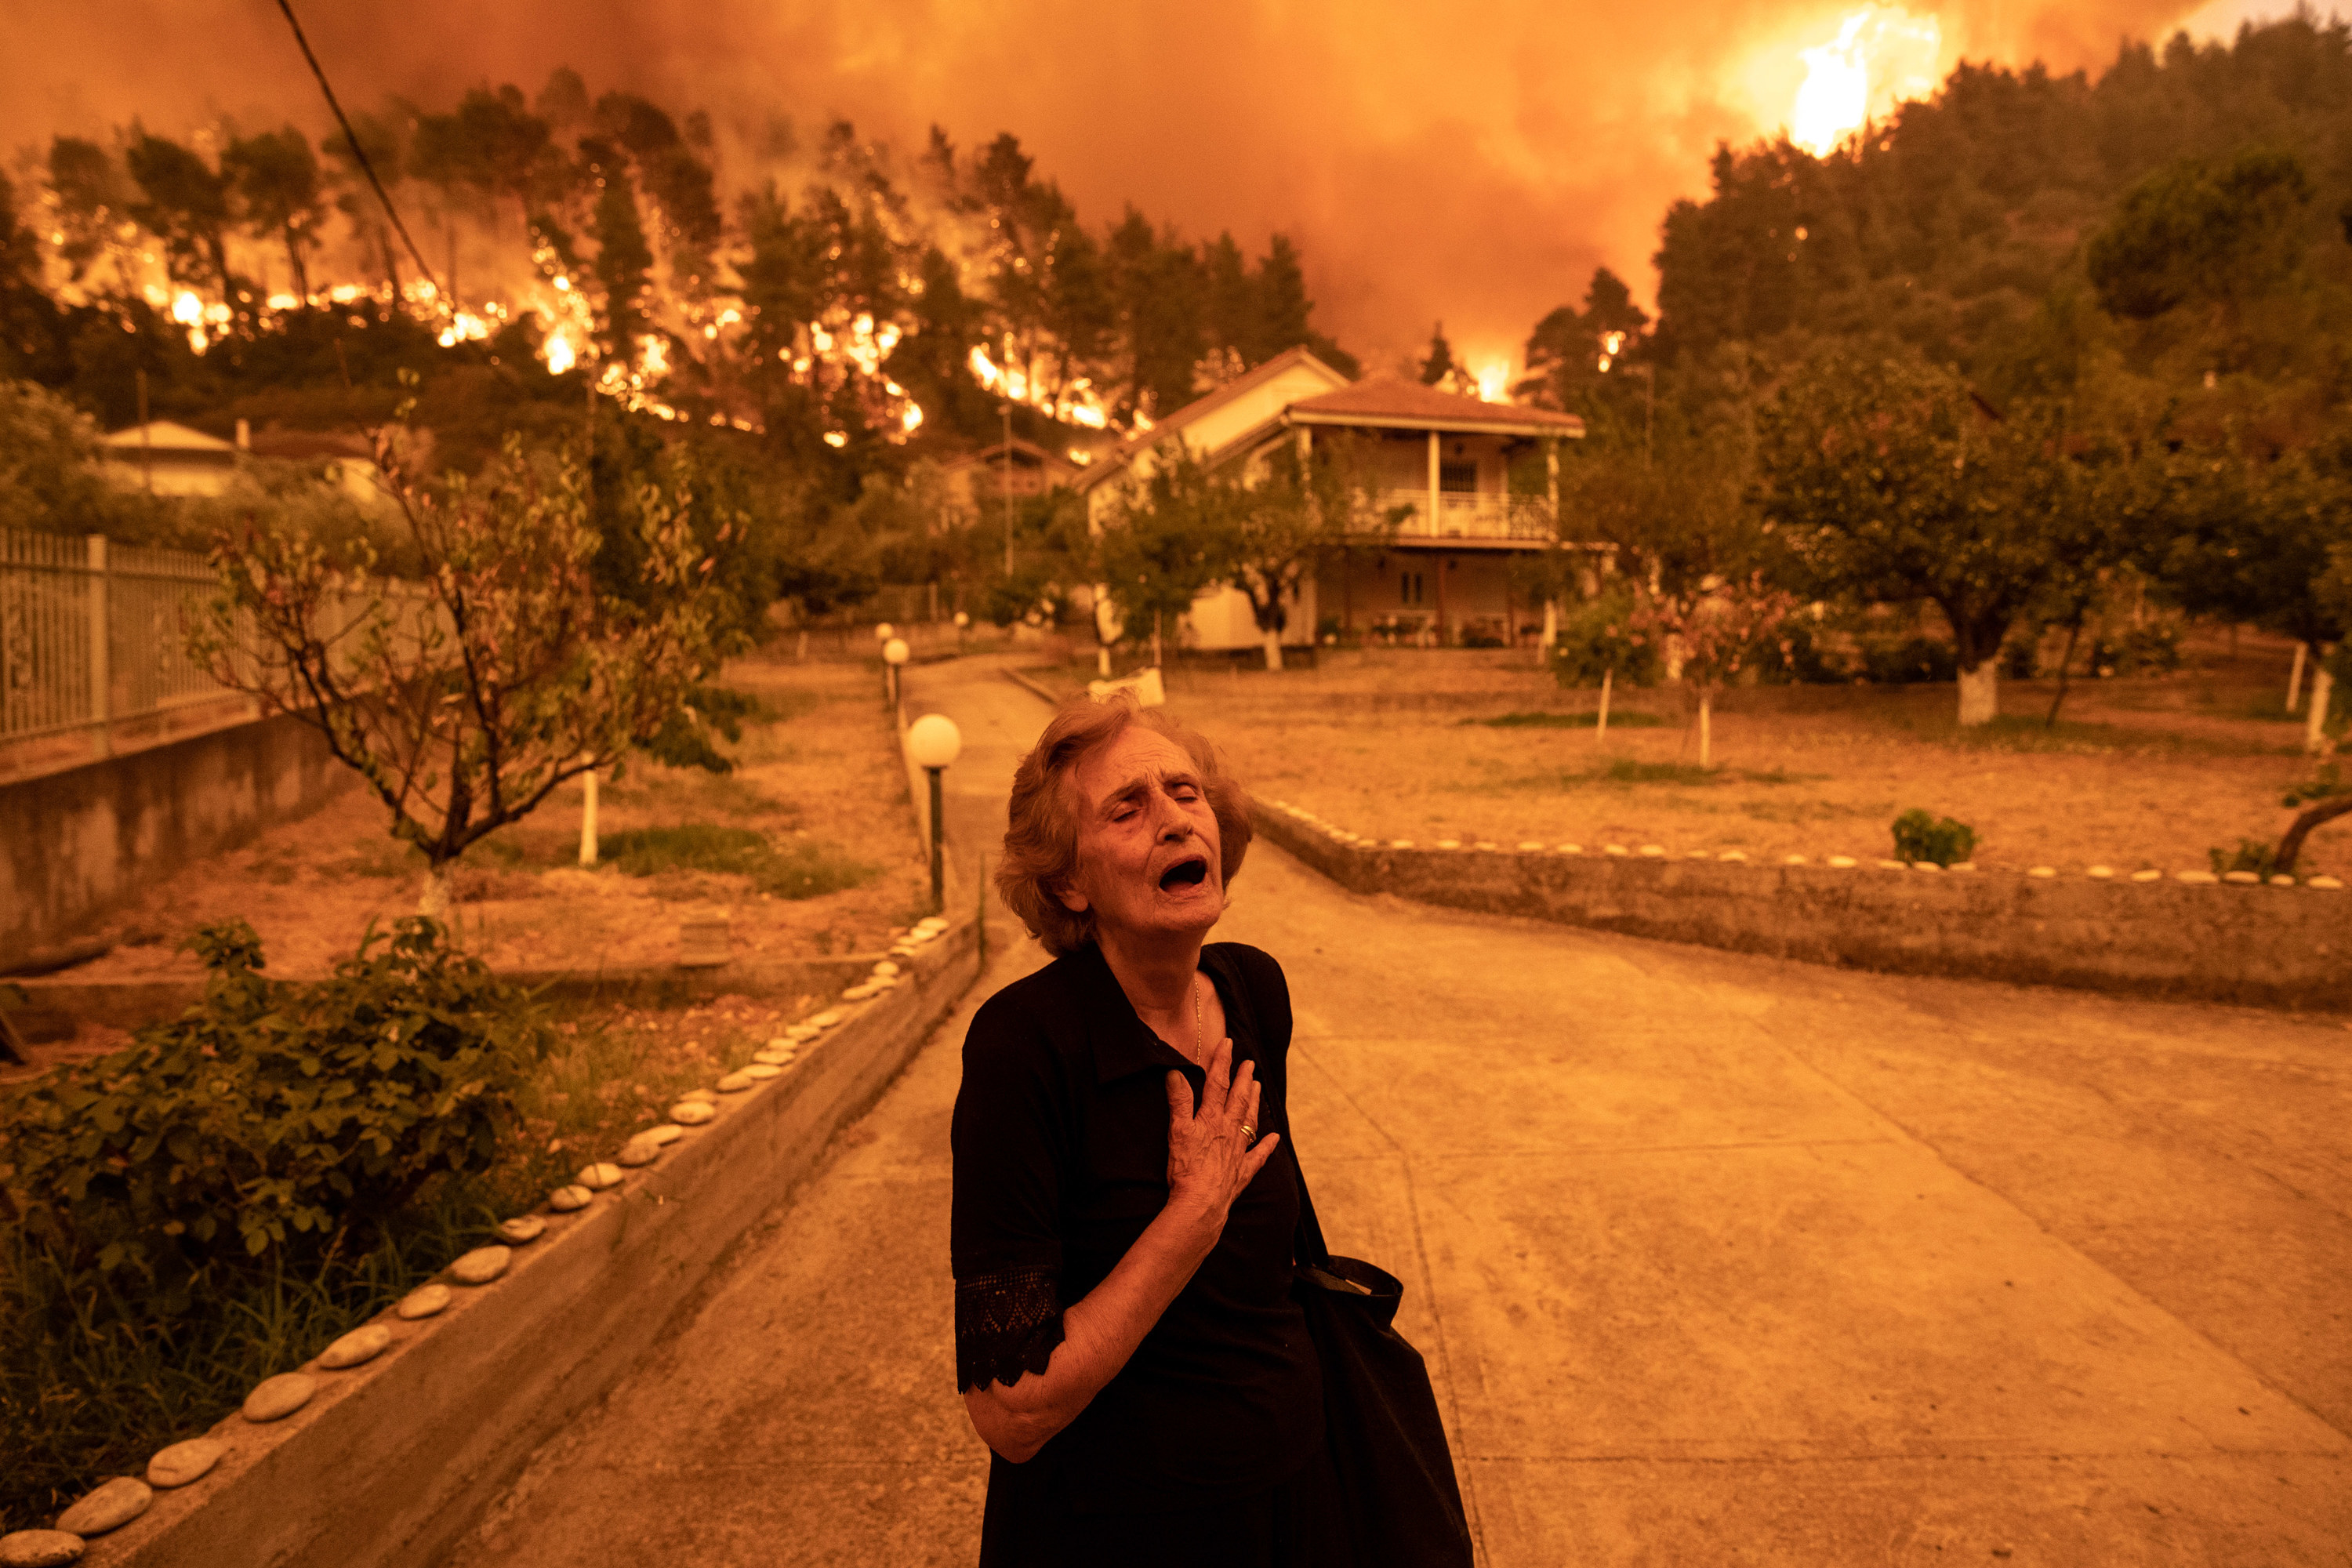 An older woman dressed in black clutches her chest while the landscape behind her burns orange